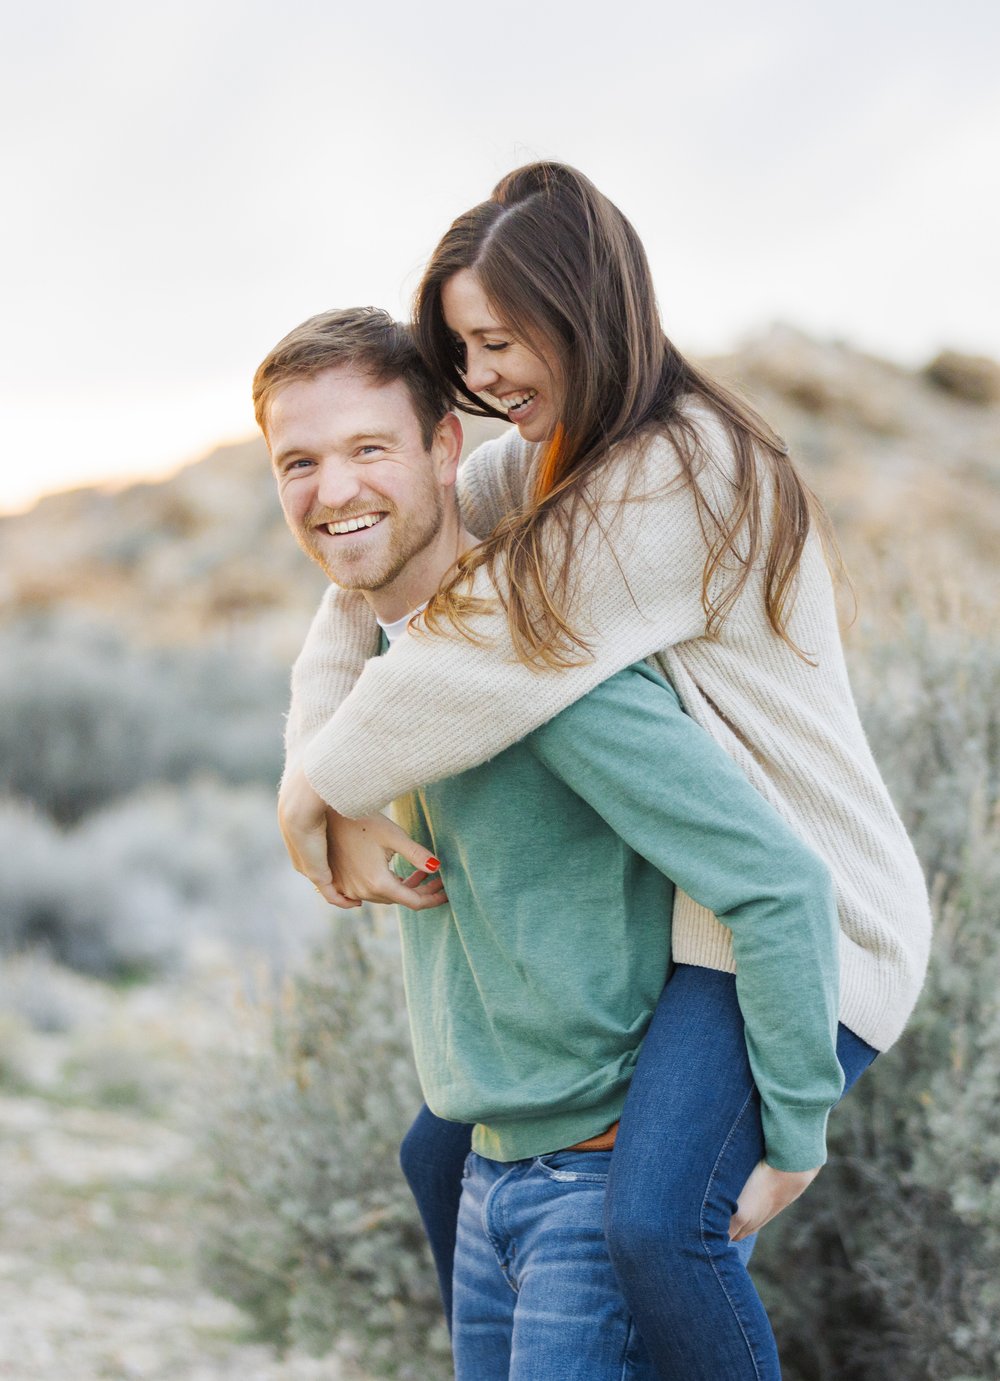  Authentic engagement portrait of a man and woman laughing by Savanna Richardson Photography on Antelope Island. laughing authentic engagement inspiration and ideas #SavannaRichardsonPhotography #SavannaRichardsonEngagements #UtahEngagements #Antelop